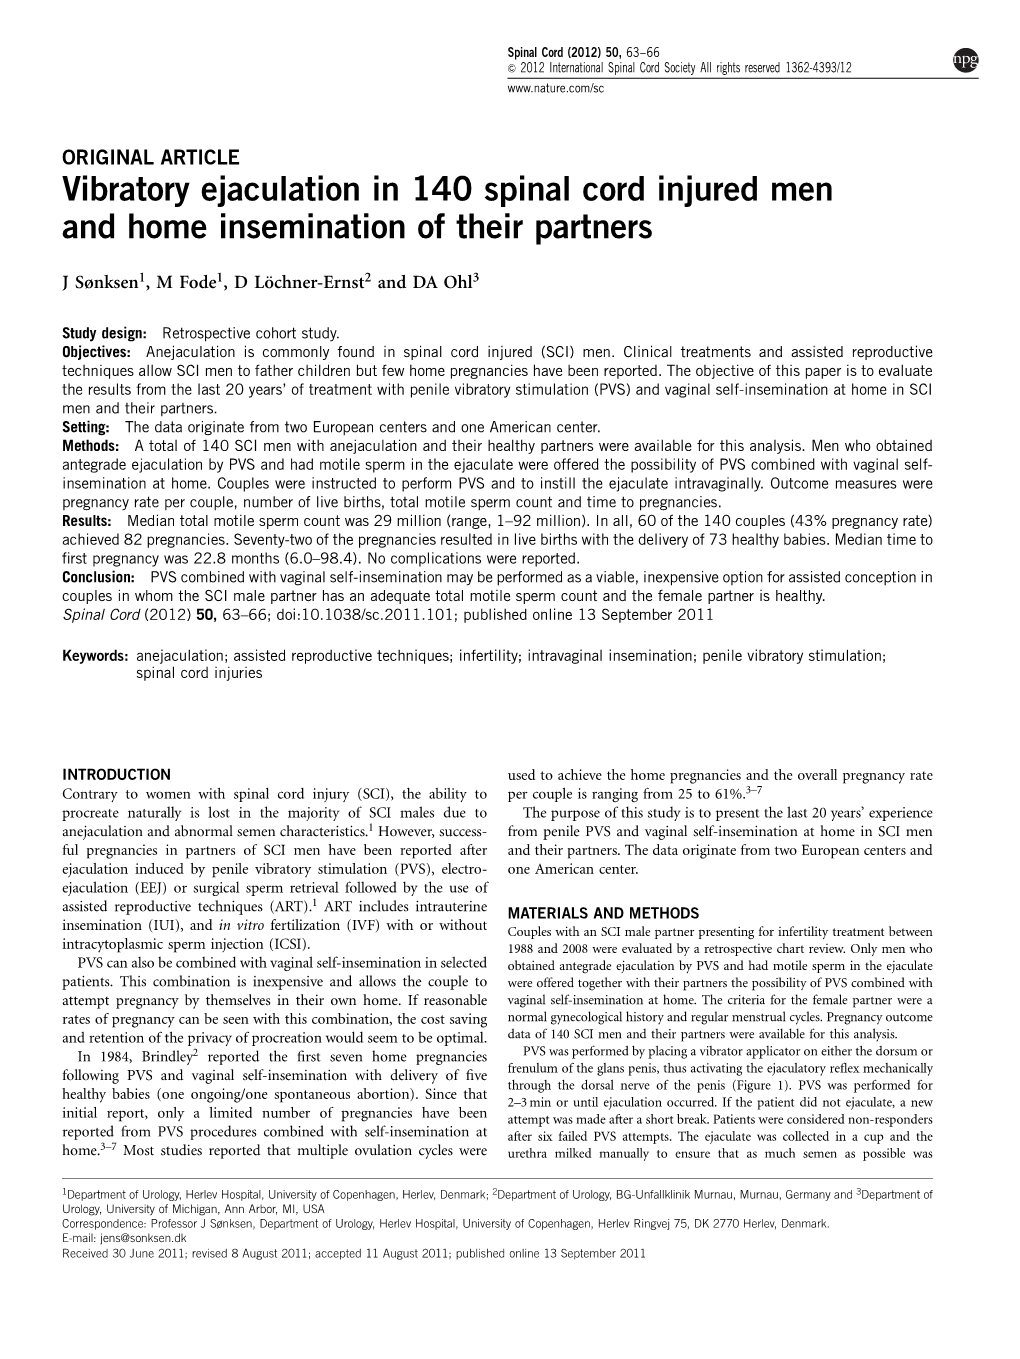 Vibratory Ejaculation in 140 Spinal Cord Injured Men and Home Insemination of Their Partners